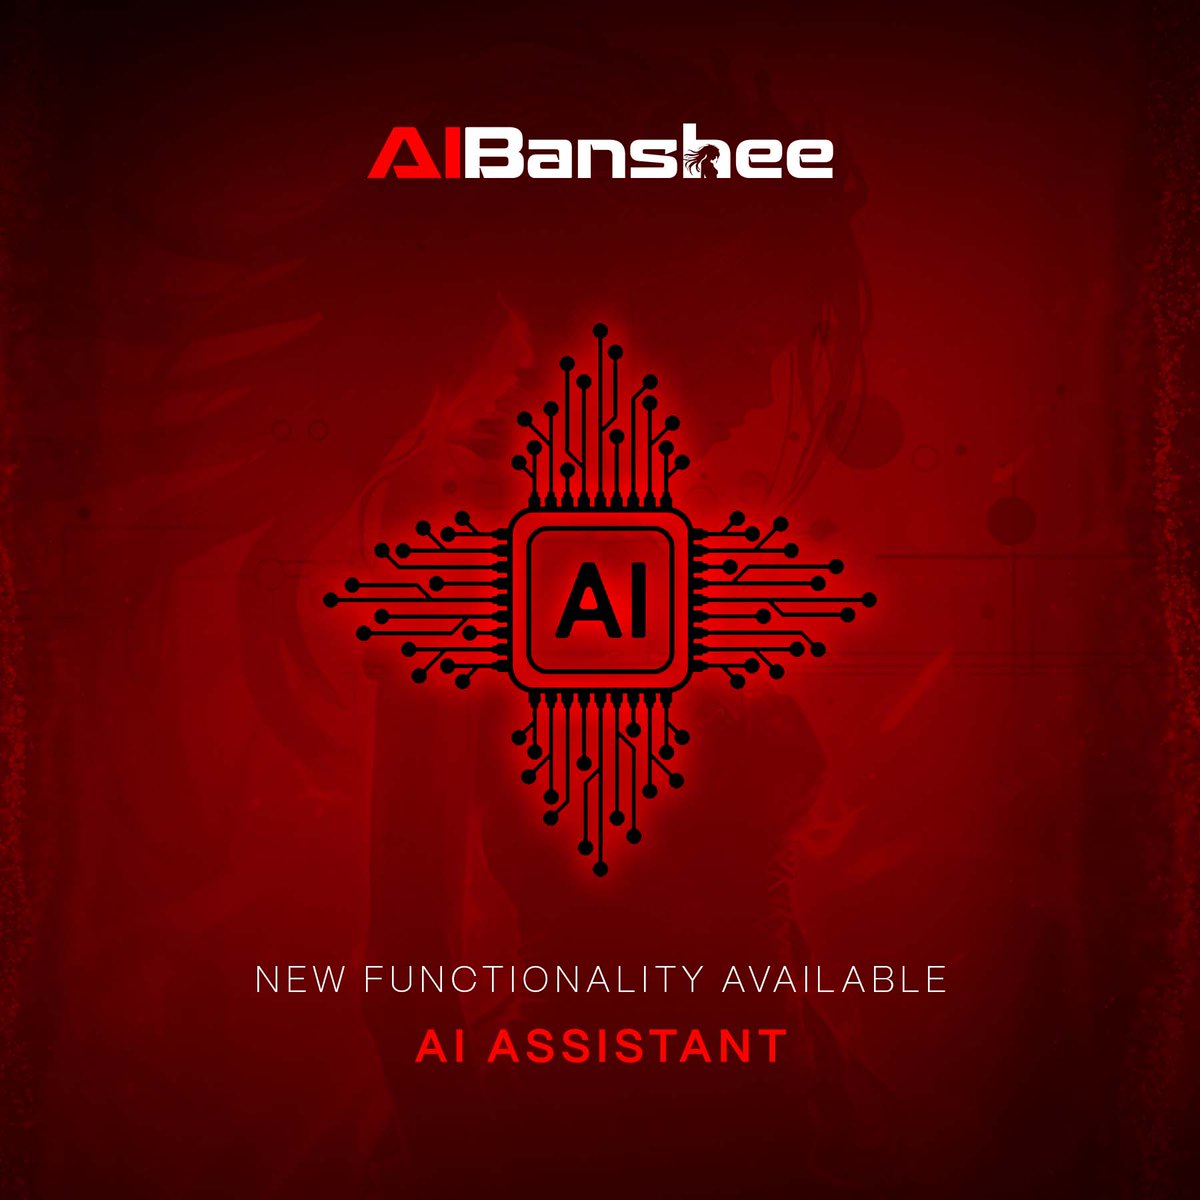 ✅ Here we are excited and operating at full power! Here's some more news:

✅AI Assistant has been added to the platform, and you can now enjoy this update!

PRESALE: aibanshee.com/?referral=buya…